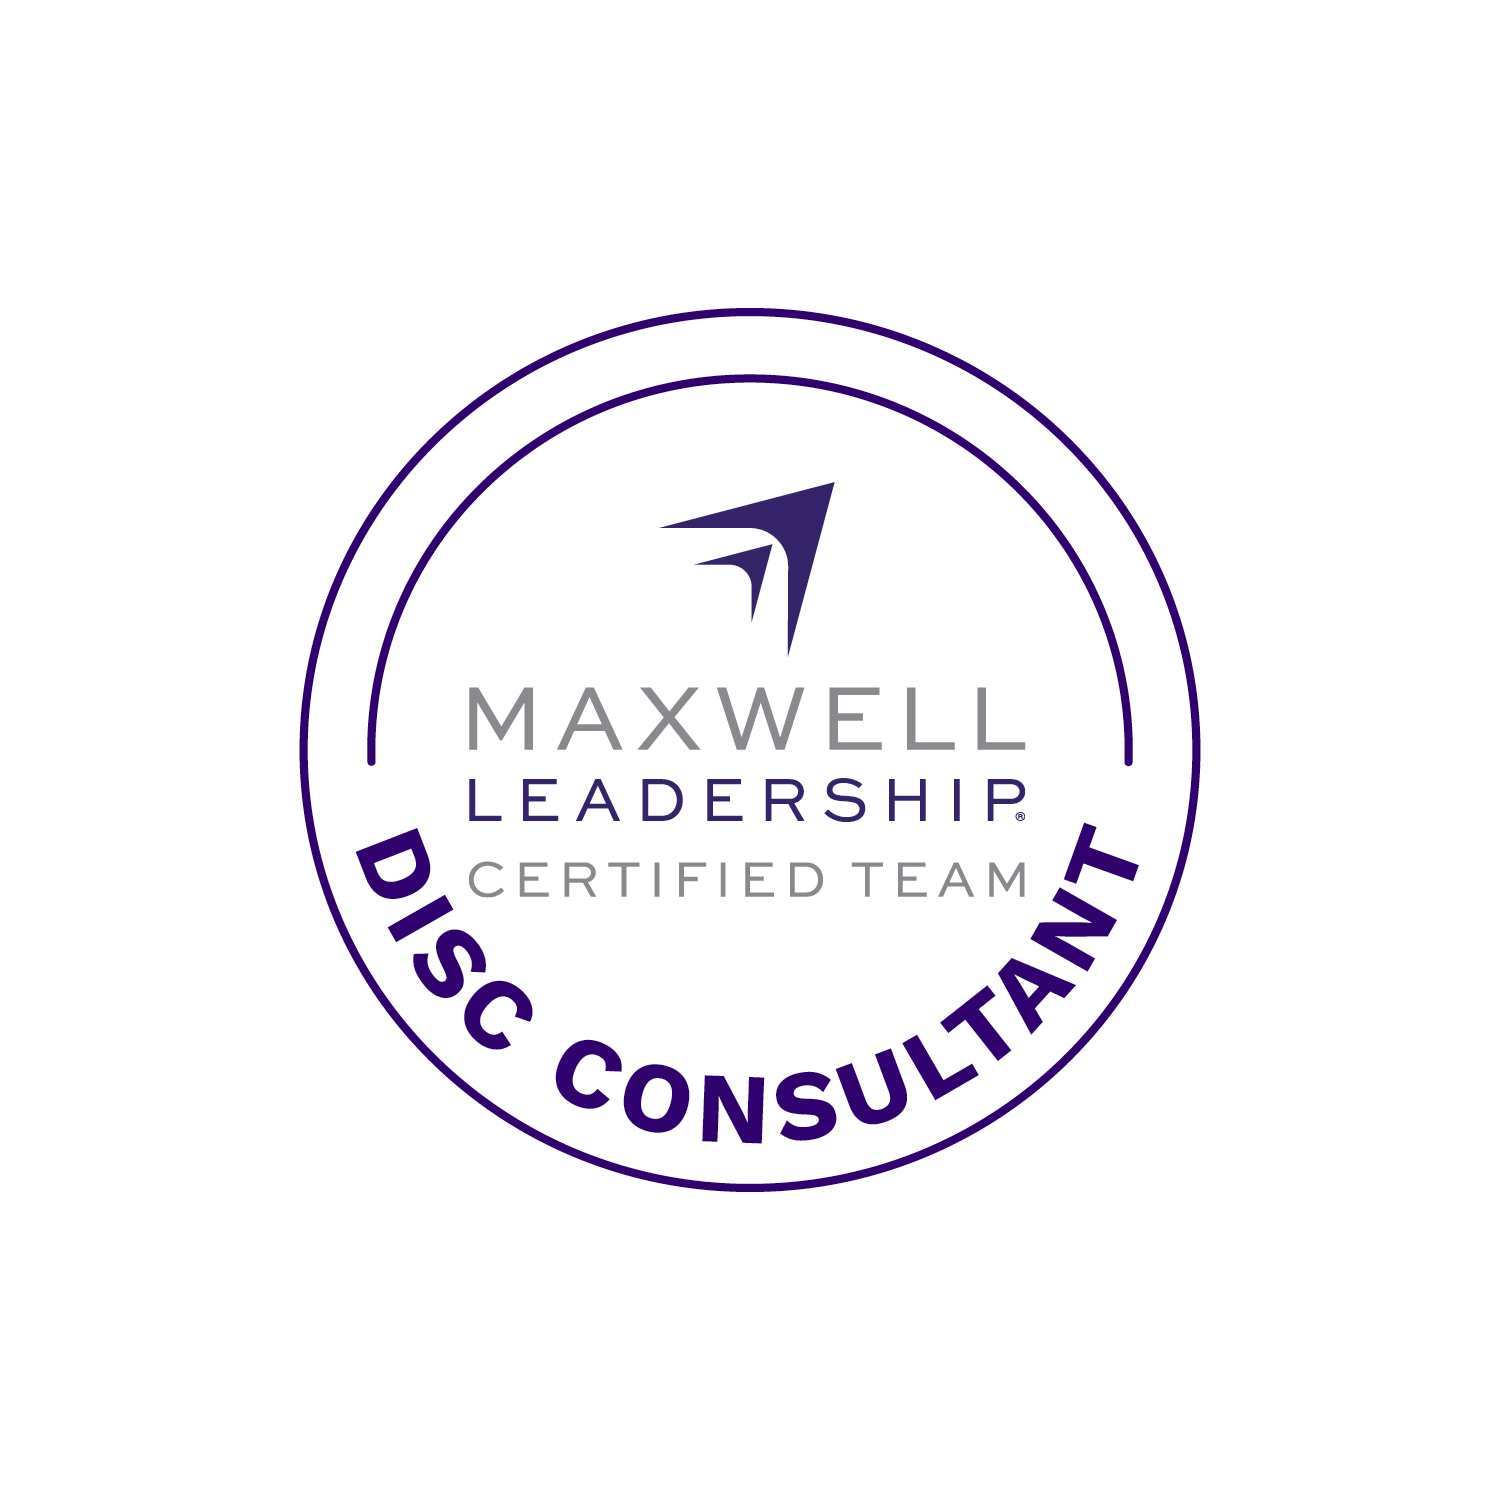 Maxwell Leadership Certified Team Disc Consultant